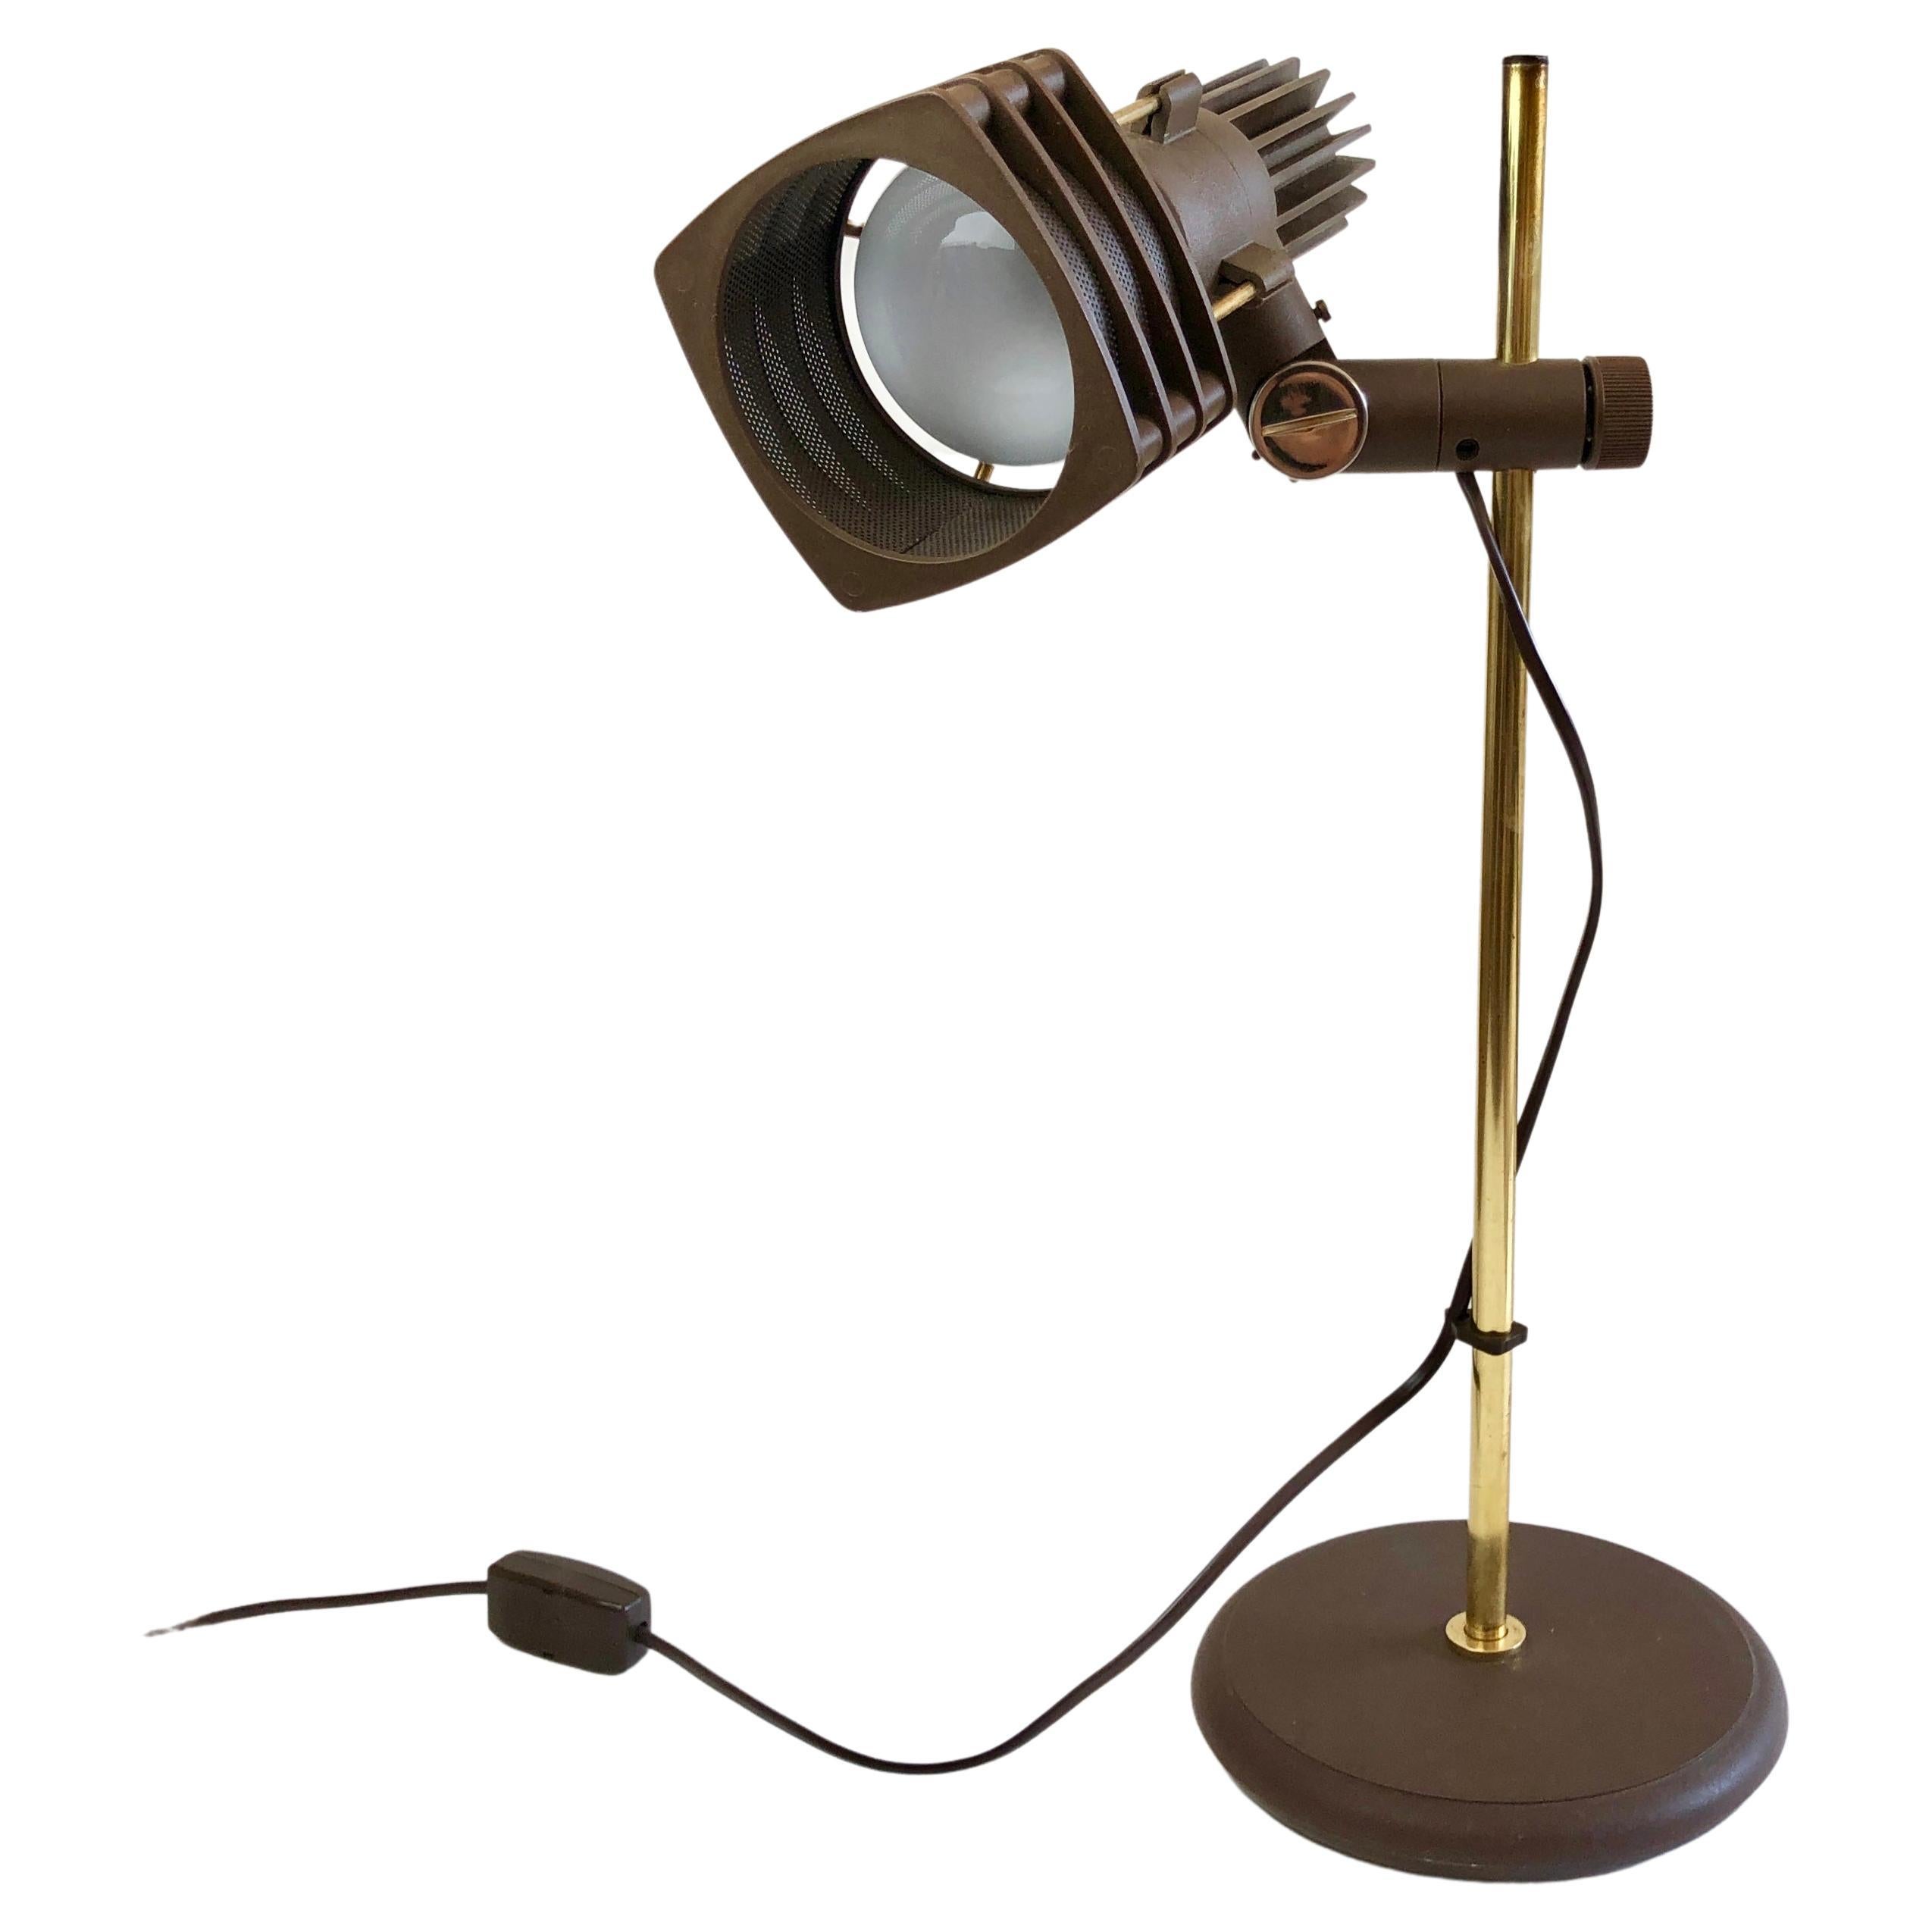 Mid-Century desk lamp – made in Spain, attributed to Fase.
A genuine 70s lamp, in original, beautiful condition.

Made from dark brown plastic with a 'rugged' finish & brass coloured metal.
The square lamp shade can be moved up- and downwards by